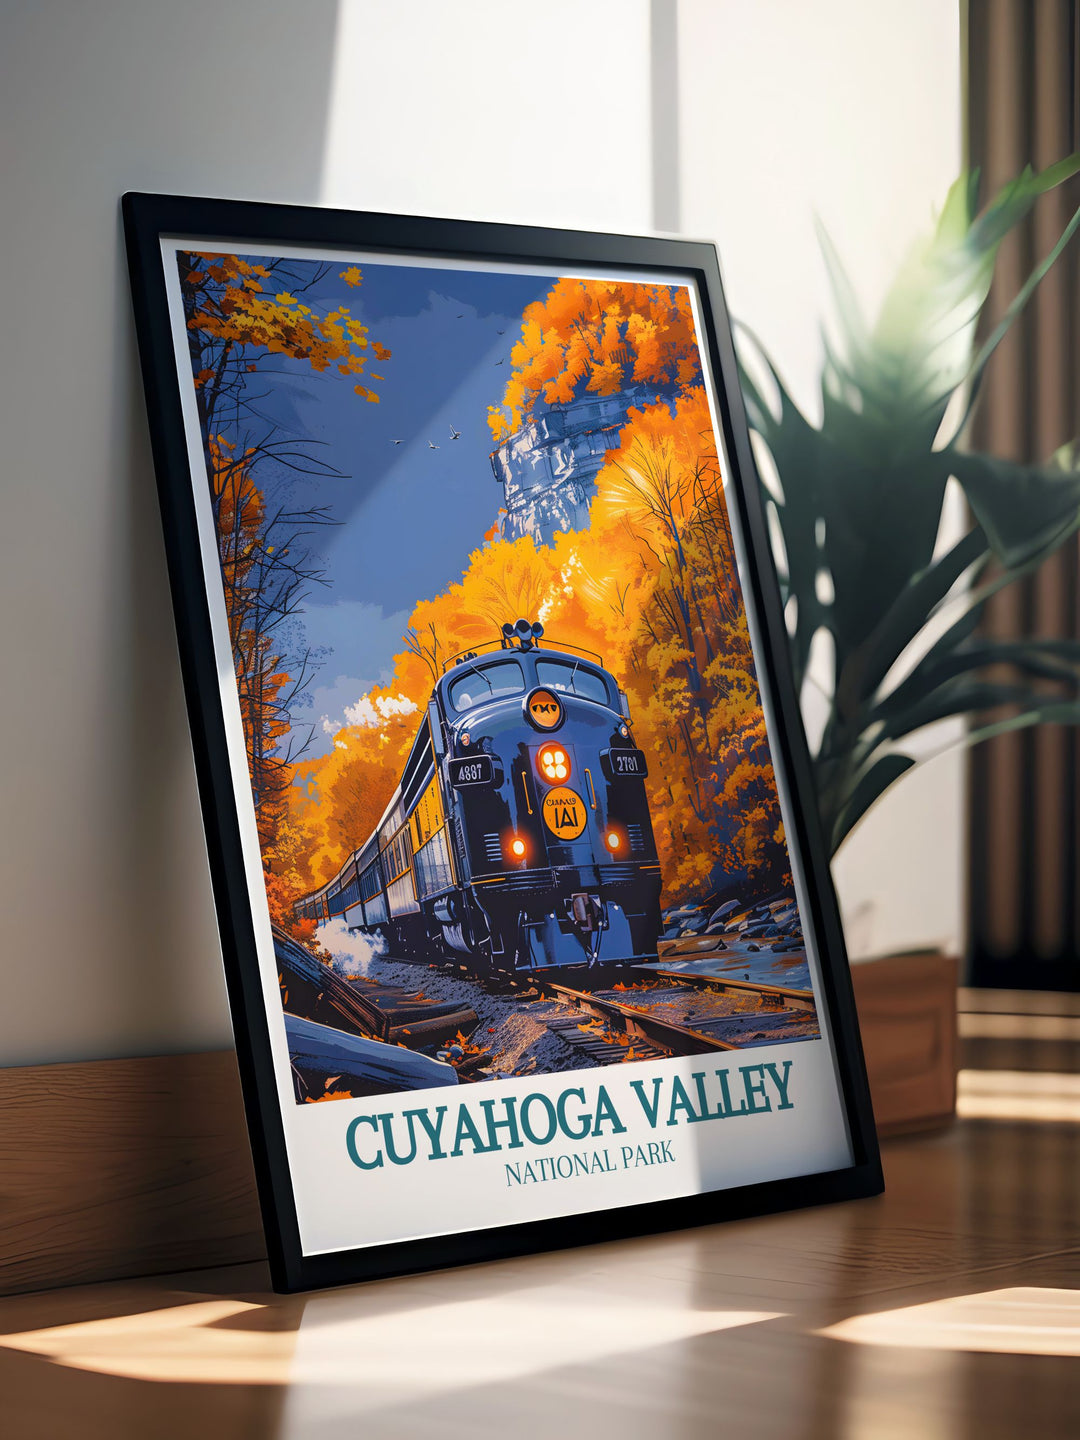 Exquisite framed art of Cuyahoga Valley National Park, showcasing the parks scenic trails and rolling hills. Ideal for bringing a piece of Ohios outdoor beauty into your home decor.